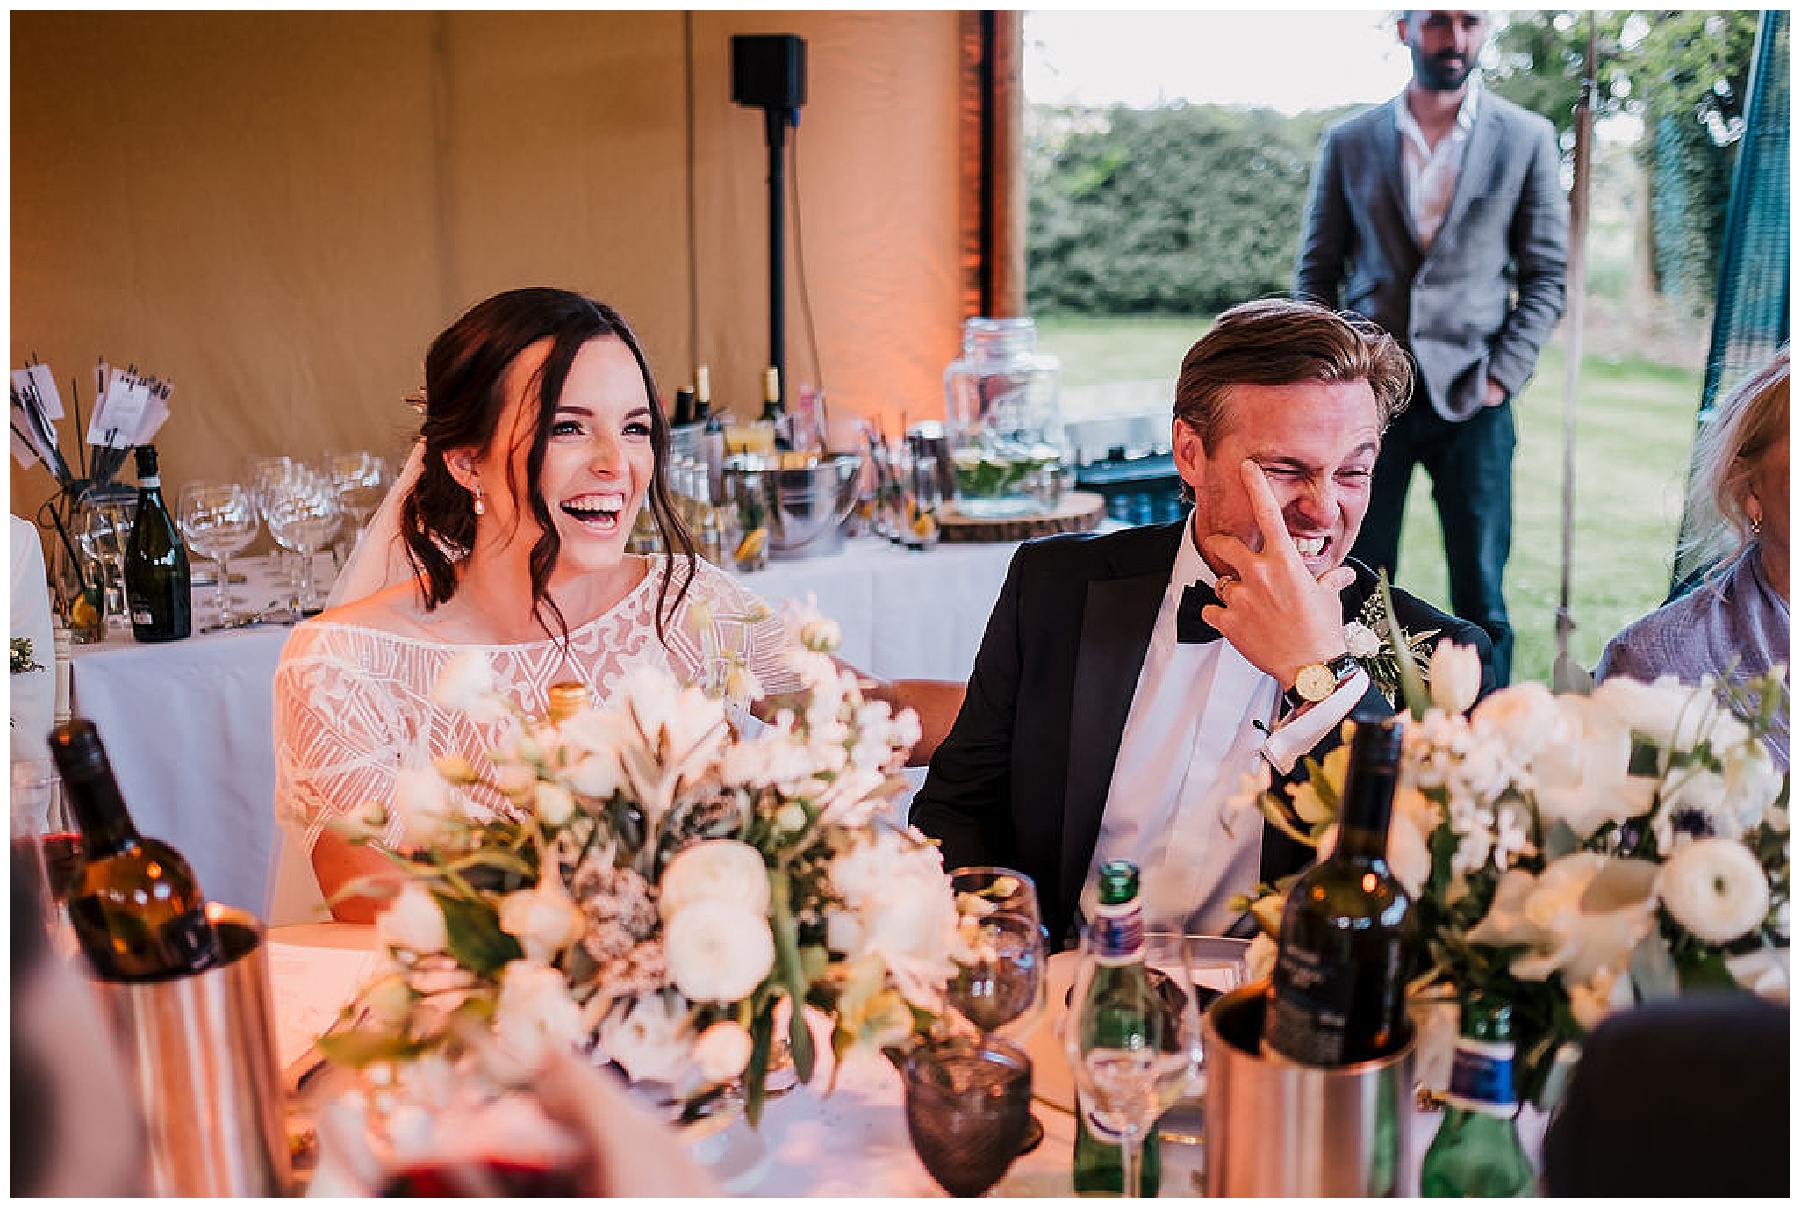 Emma + Will – Stock Farm – So lucky to have met this kind amazing couple